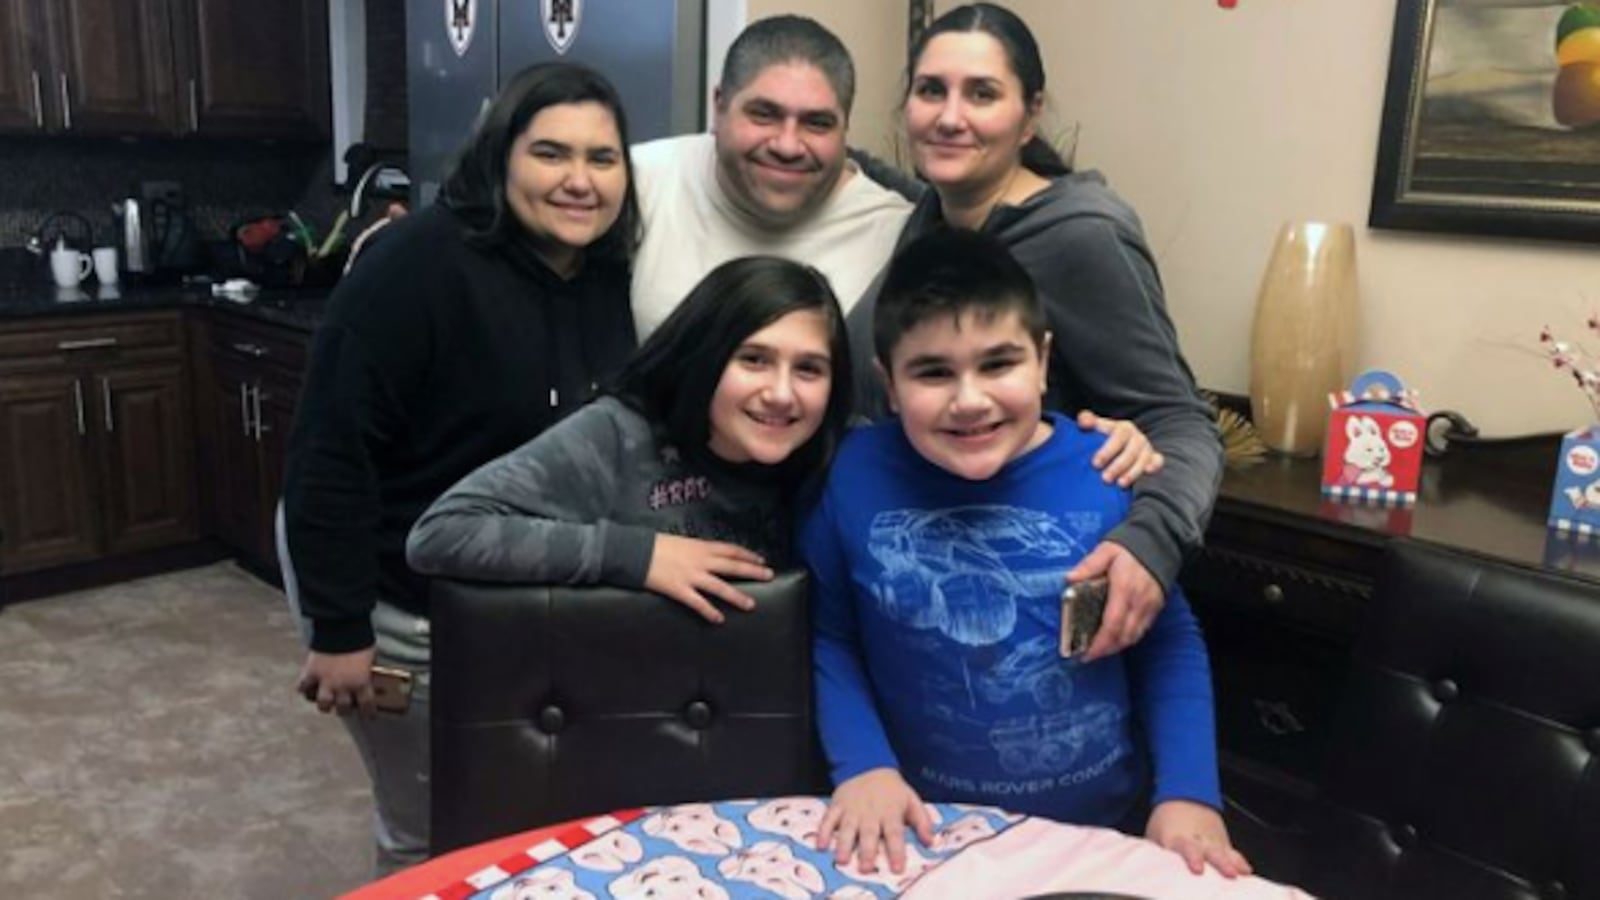 The Curich-Raccuglia family is concerned whether their son, John (bottom right), a special education student, will get needed therapy while schools are closed due to coronavirus concerns